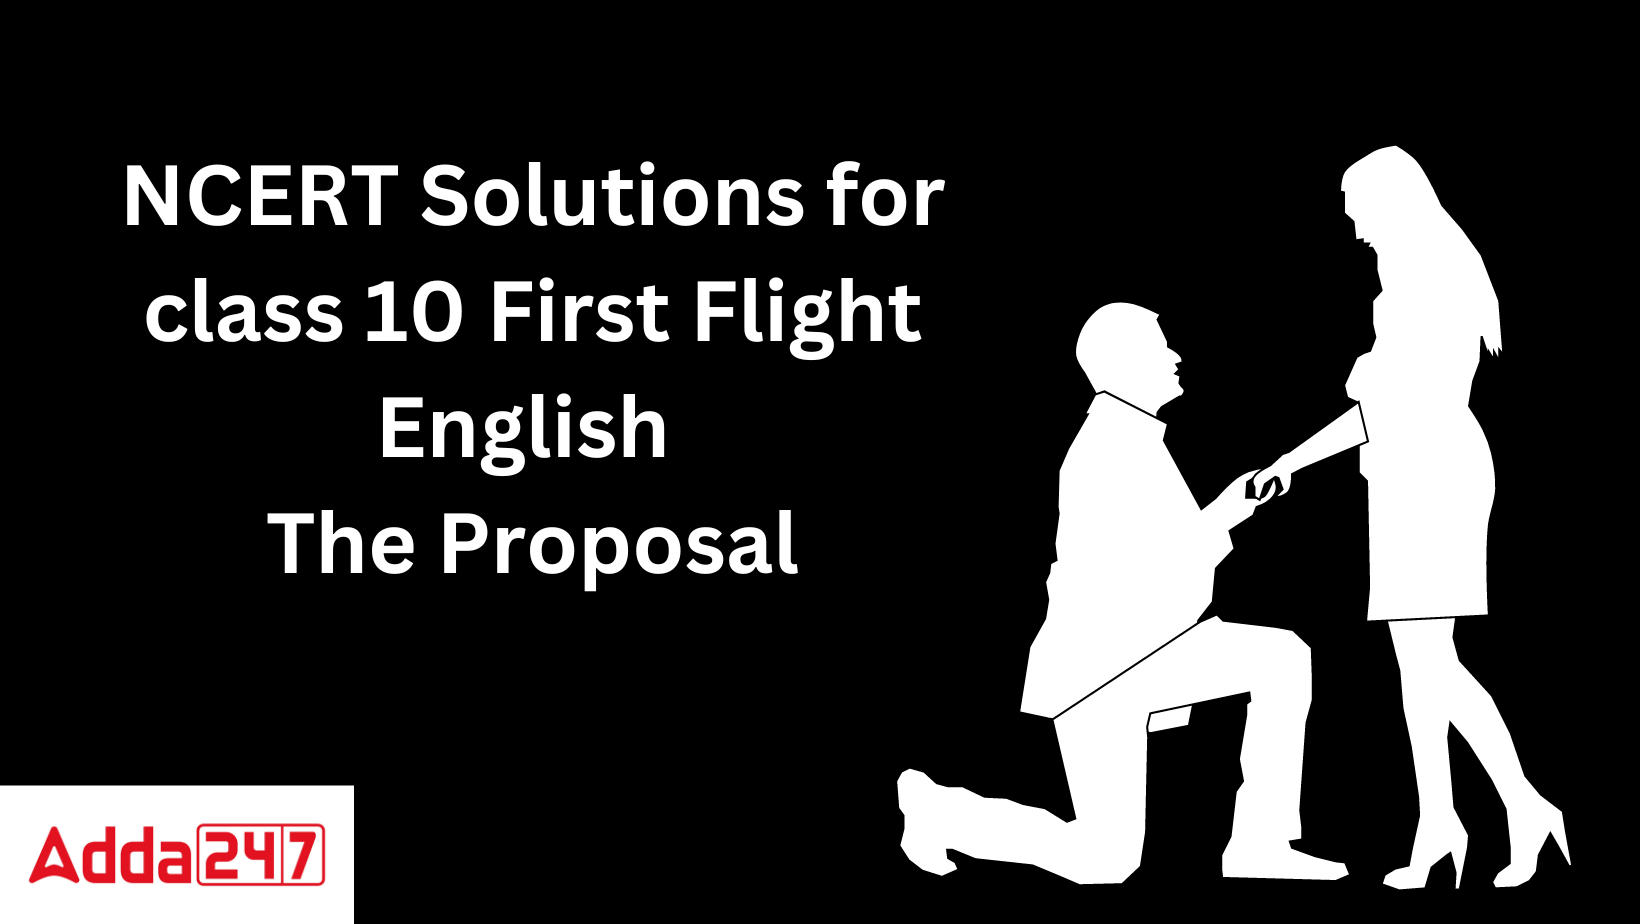 NCERT Solutions for class 10 First Flight English The Proposal